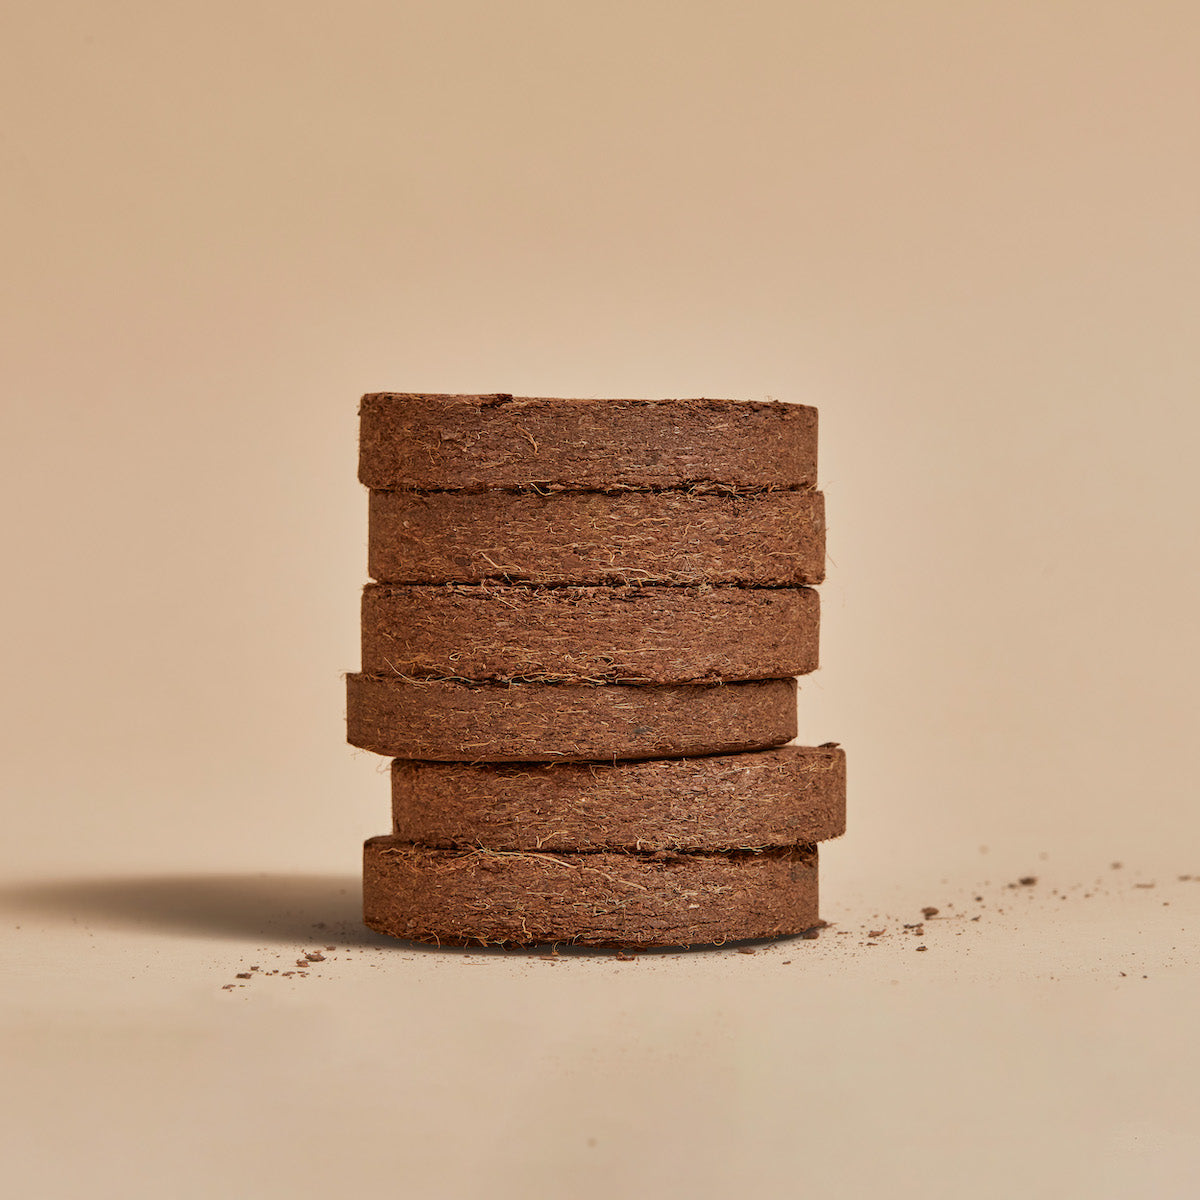 Stacked coir pucks